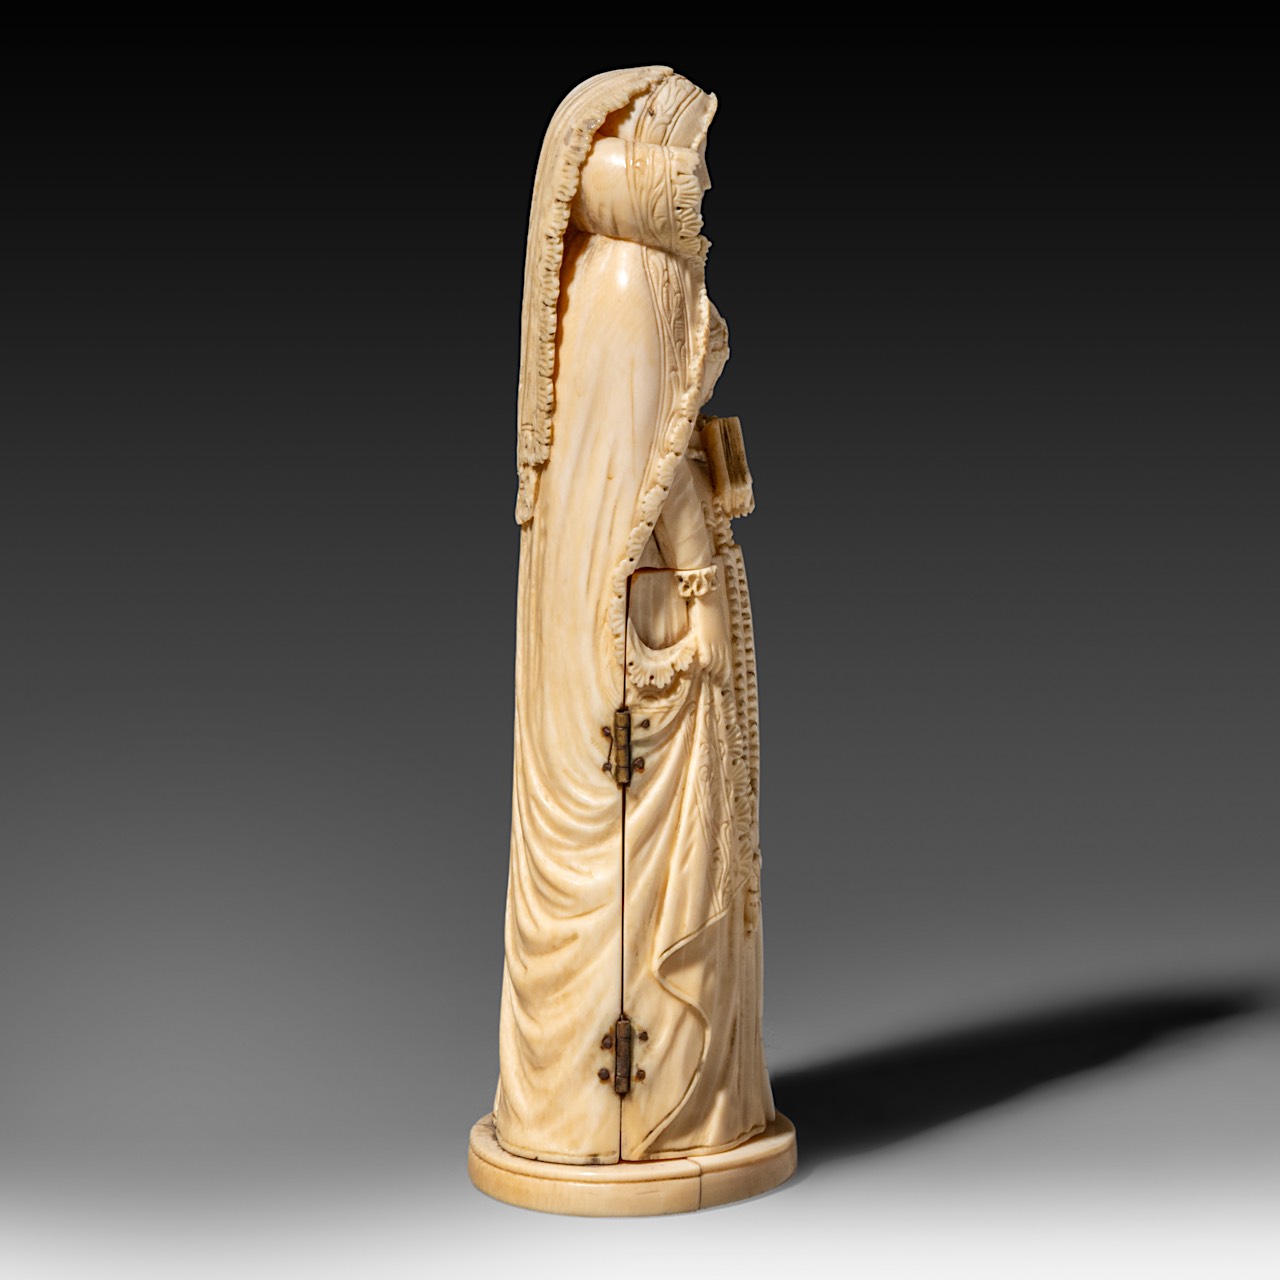 An ivory triptych sculpture of probably Mary Queen of Scots, French, 19thC, H 20 cm - 447 g (+) - Image 6 of 12